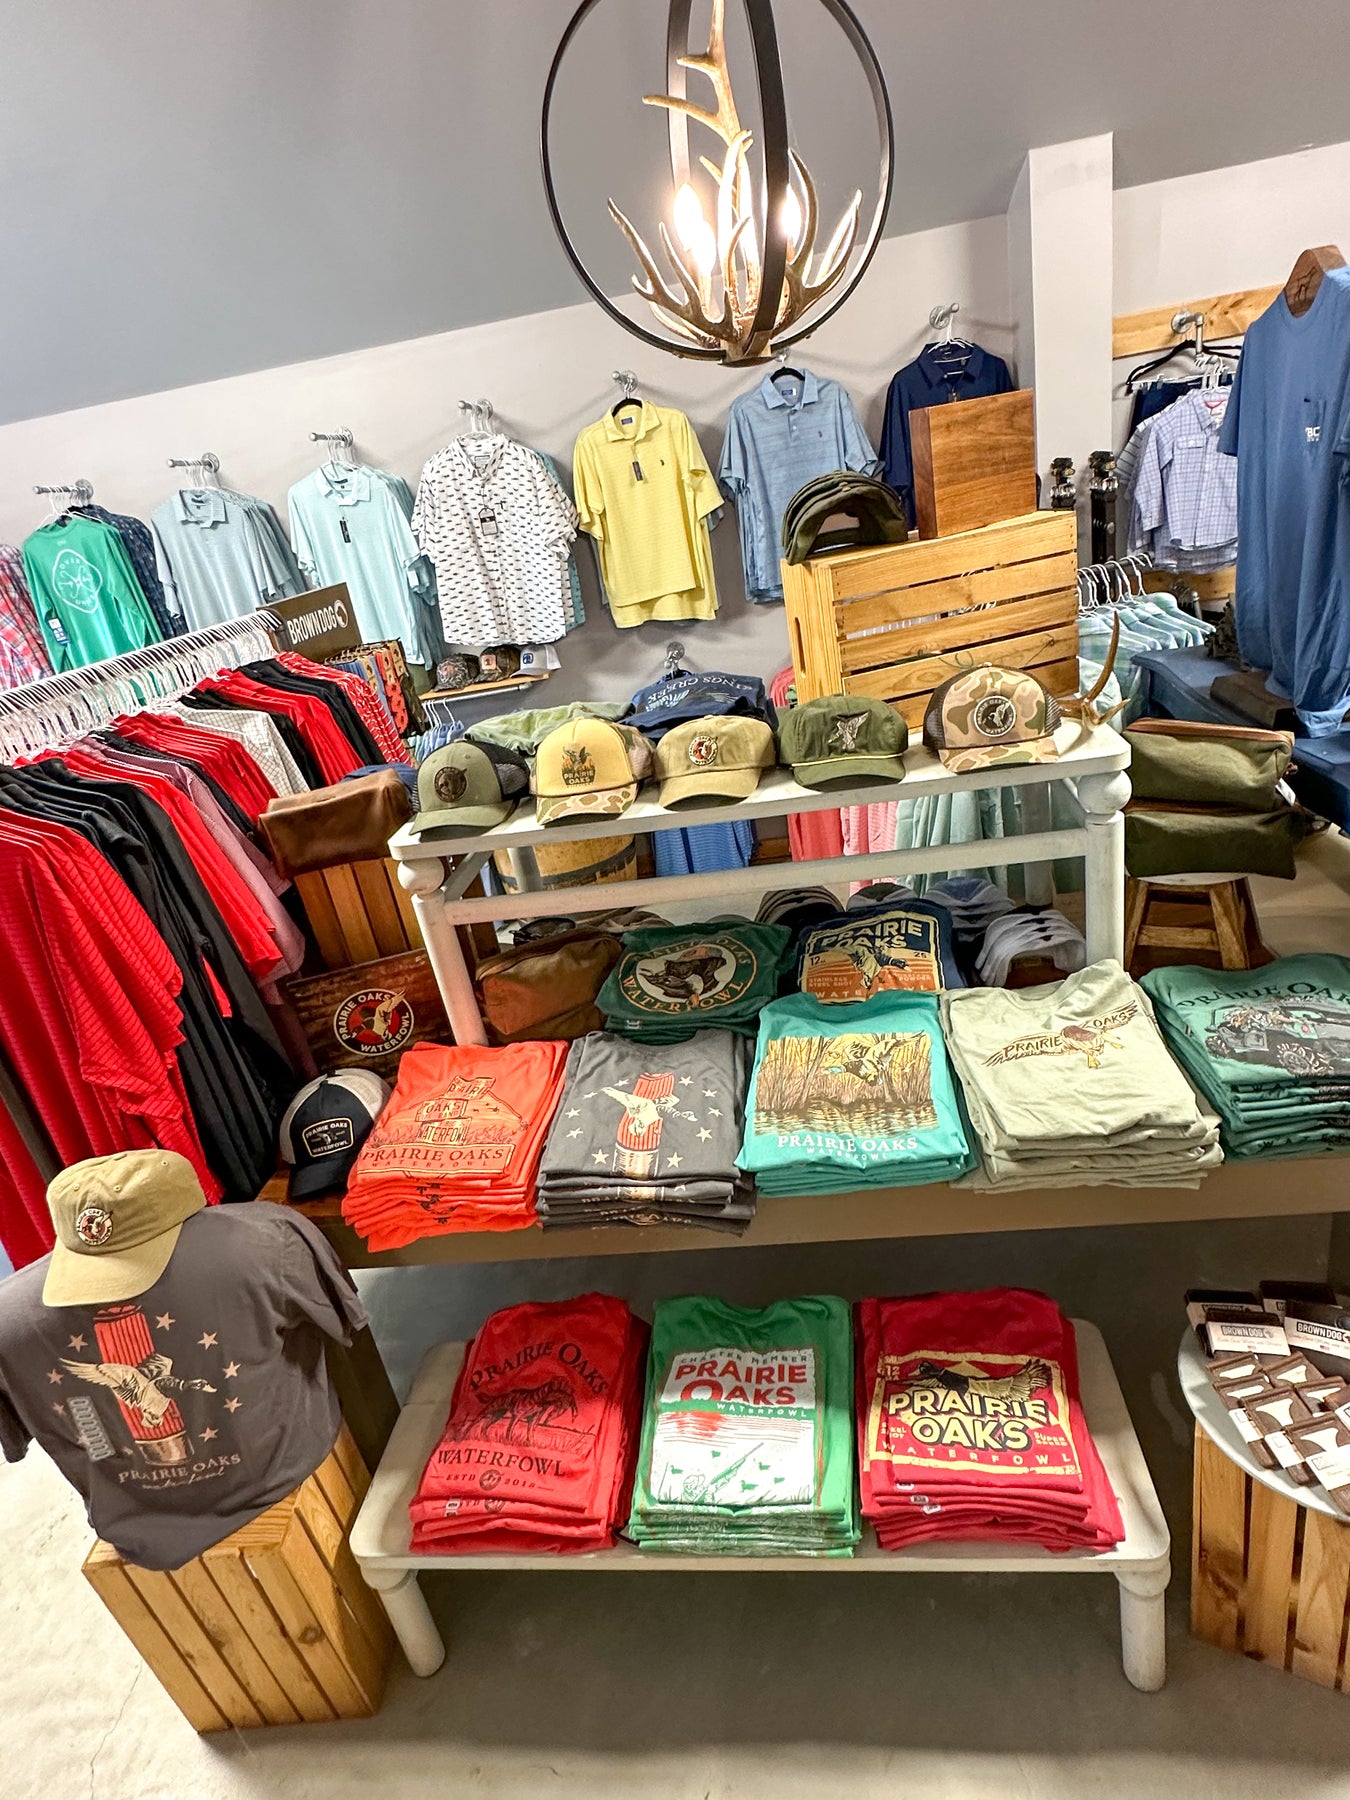 Pictured is a retail display of mens tee shirts and hats.